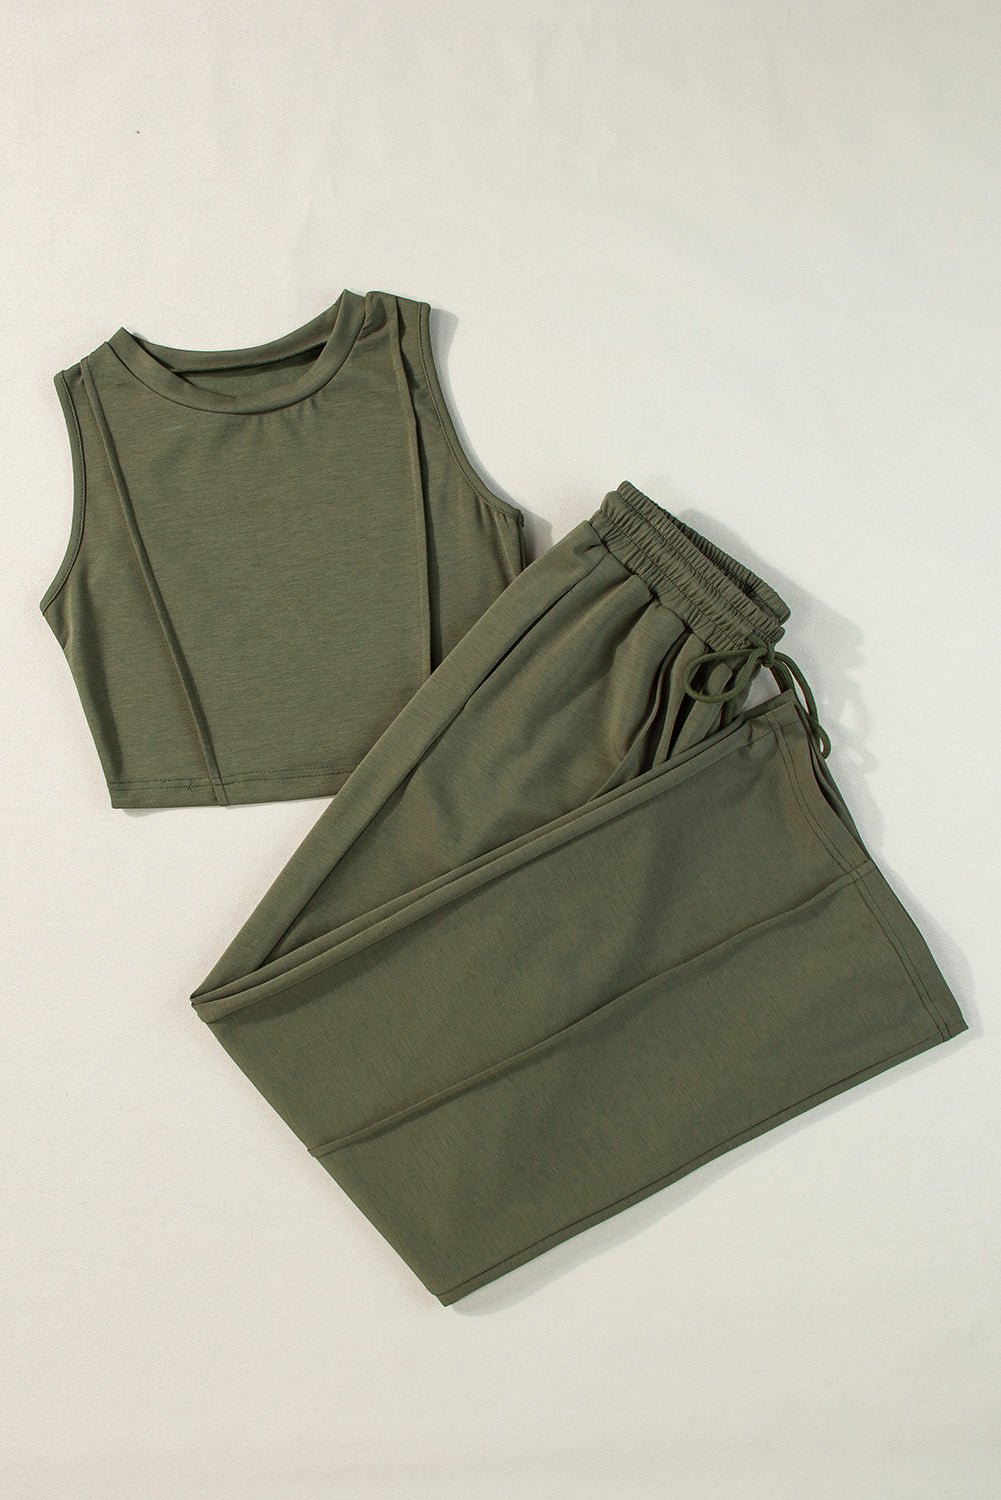 Jungle Green Solid Sleeveless Crop Top and Wide Leg Pants Set